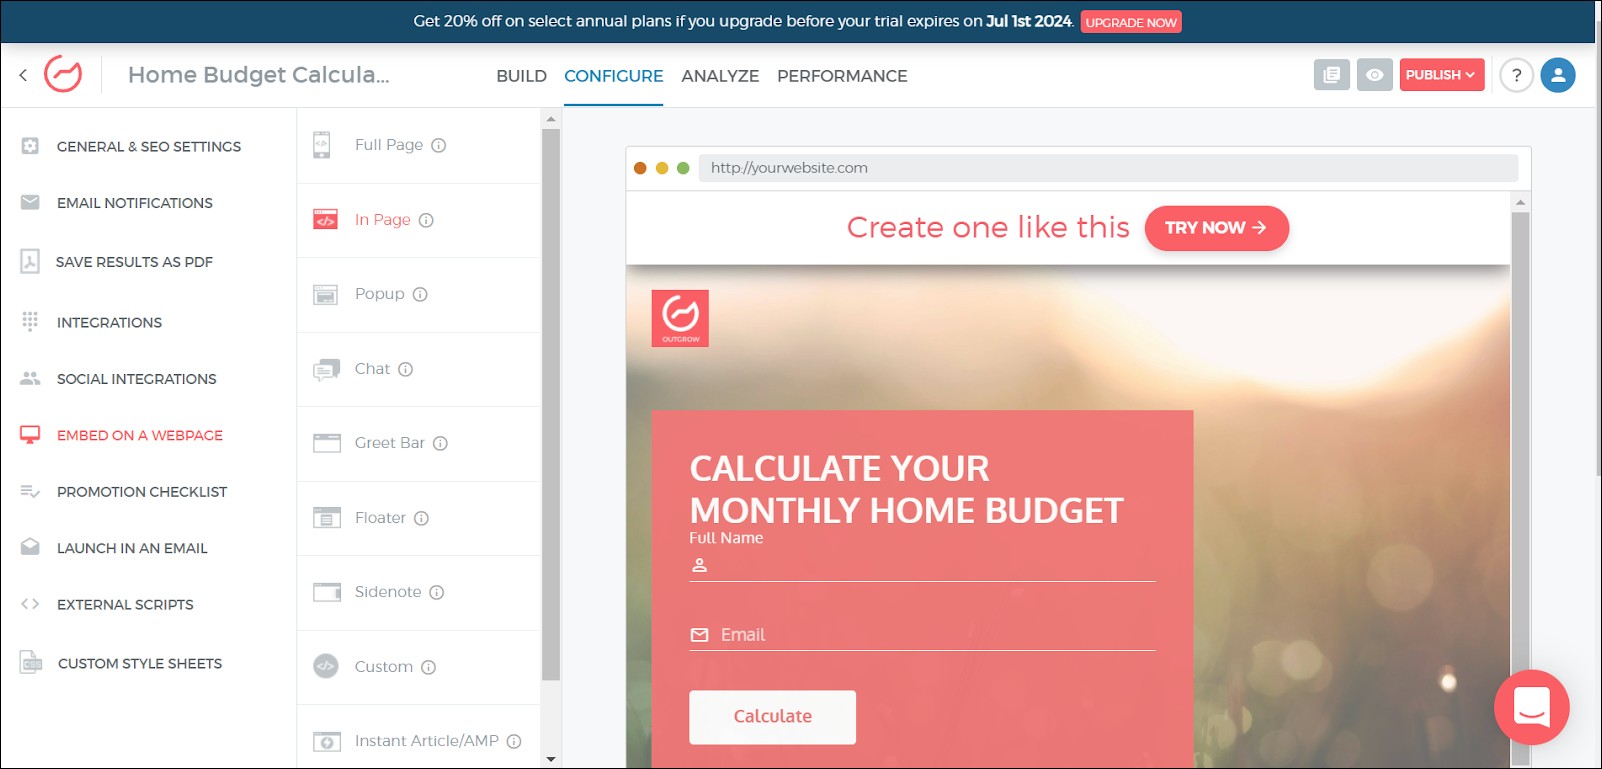 How to Build an ROI Calculator in Just 4 Easy Steps?